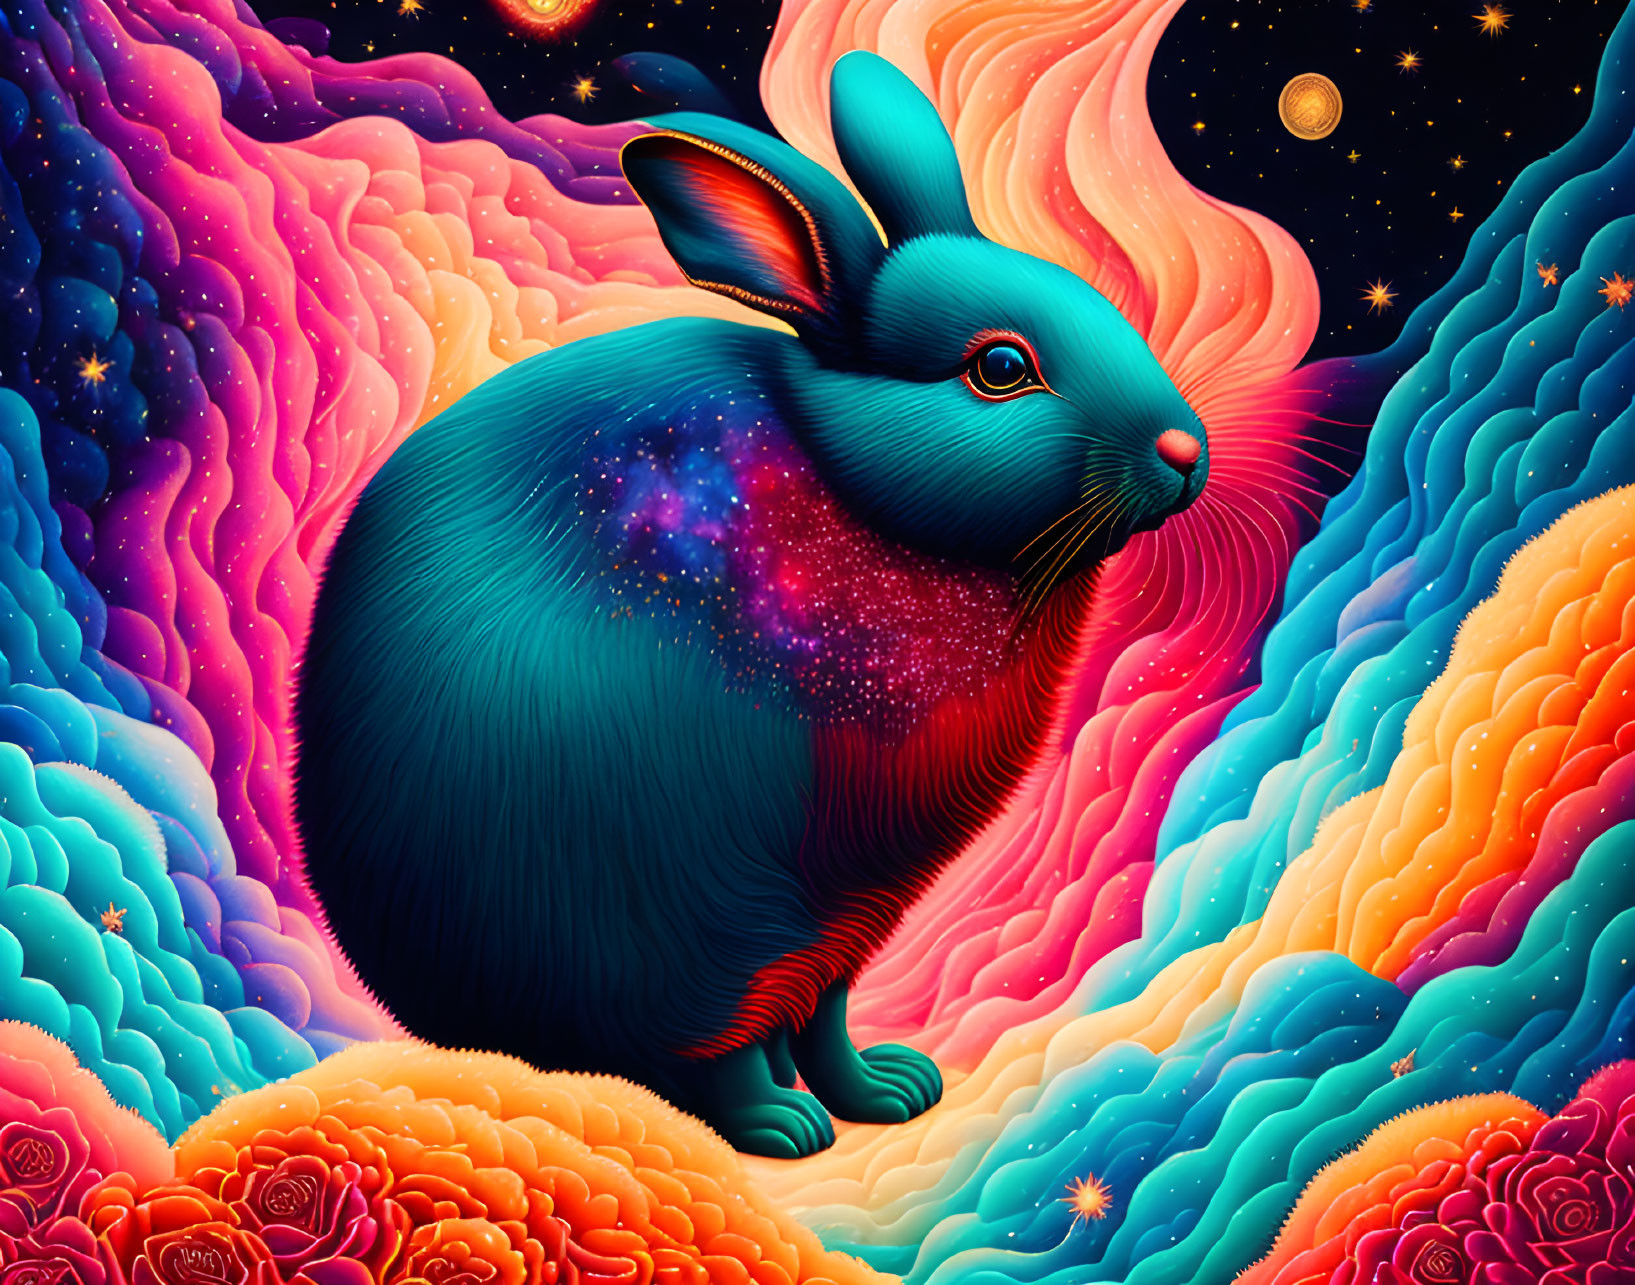 Colorful cosmic rabbit surrounded by swirling clouds and floral patterns